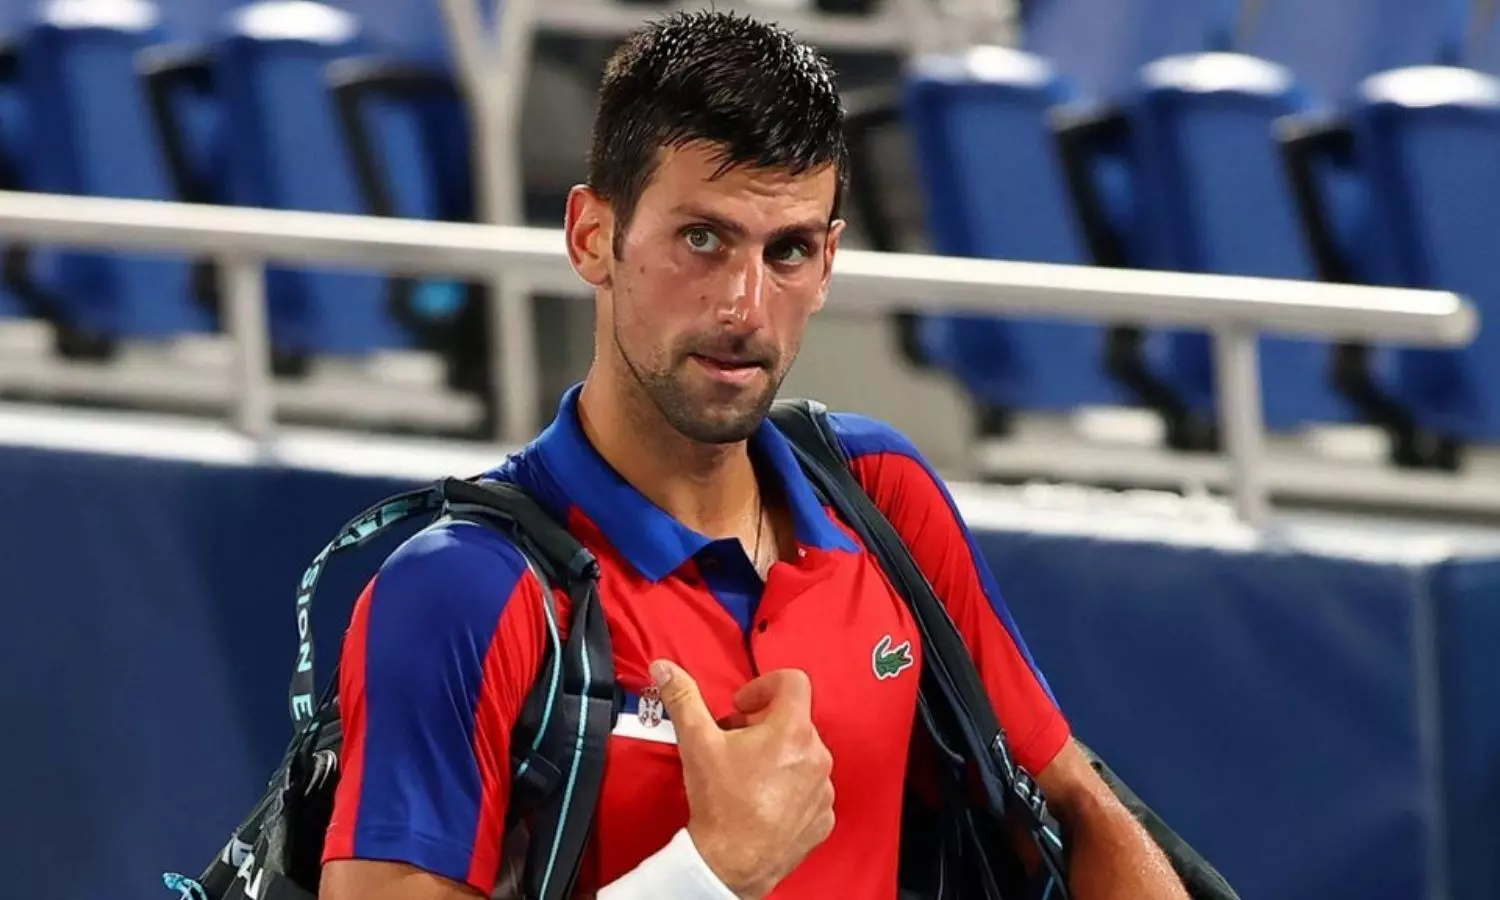 Novak Djokovic after his loss to Alexander Zverev at the Tokyo Olympics (Source: Getty)